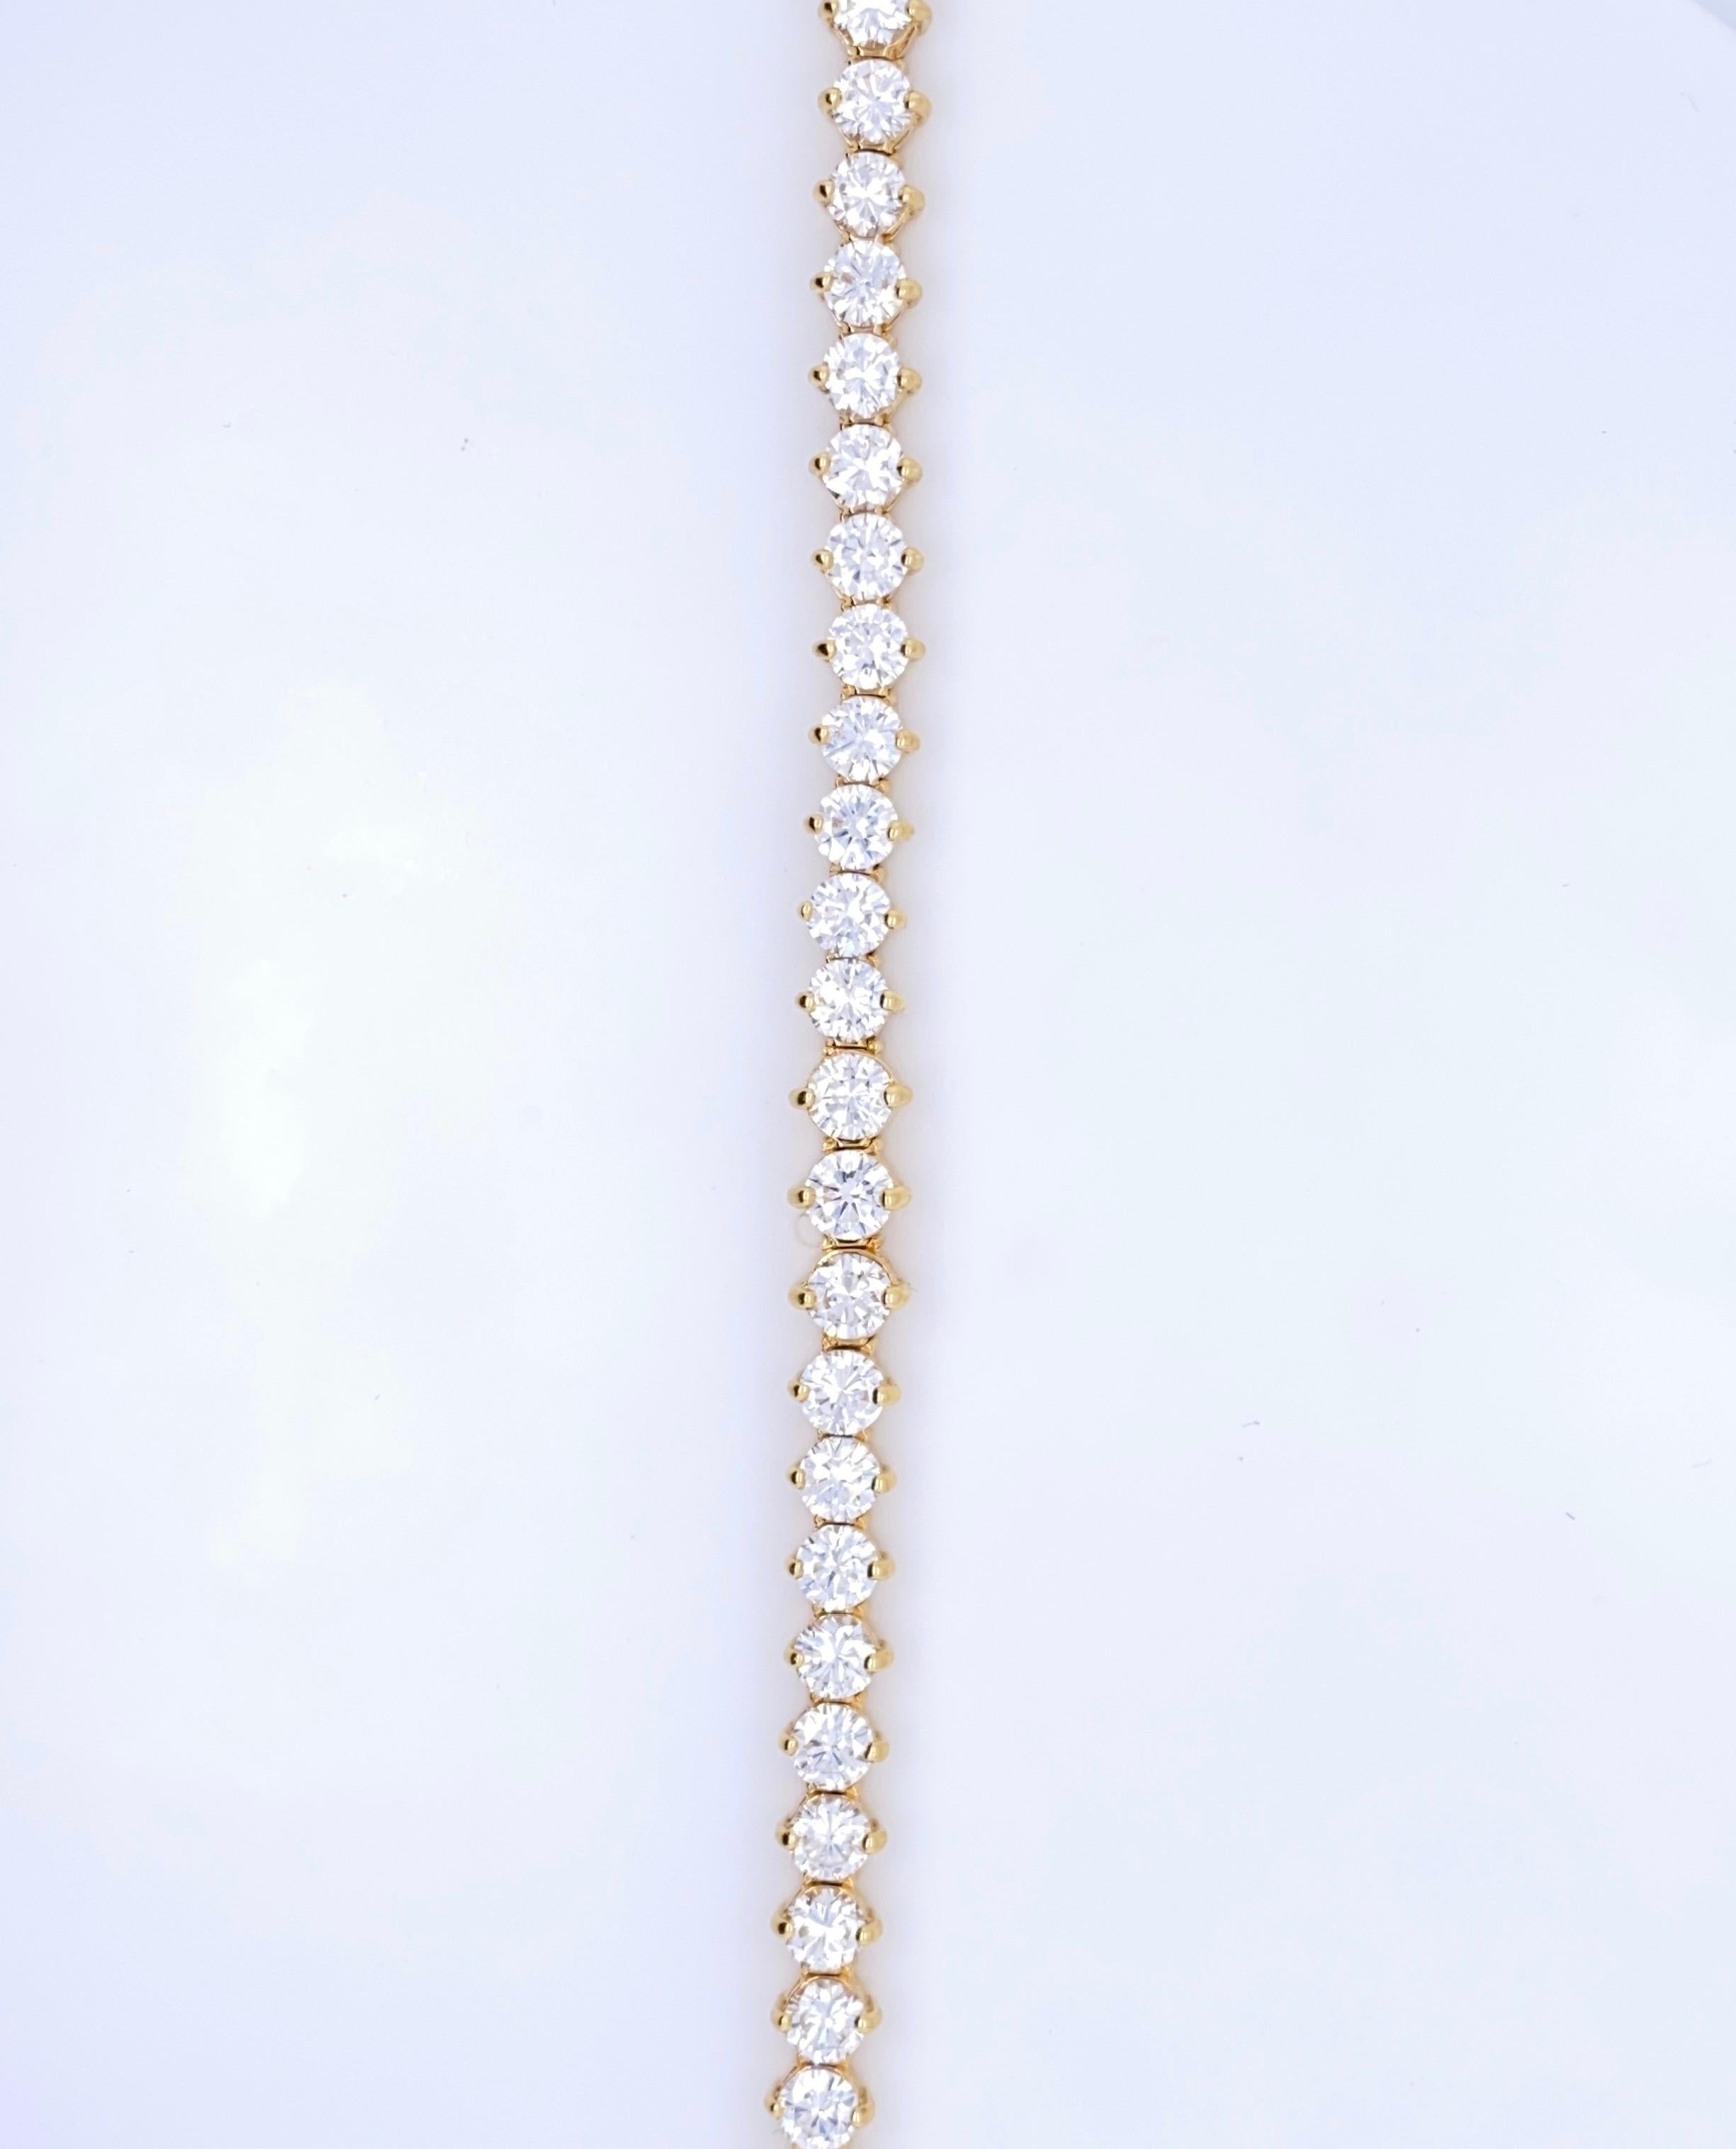 10 Carat Round Cut Diamond Gold Tennis Bracelet In Excellent Condition For Sale In New York, NY